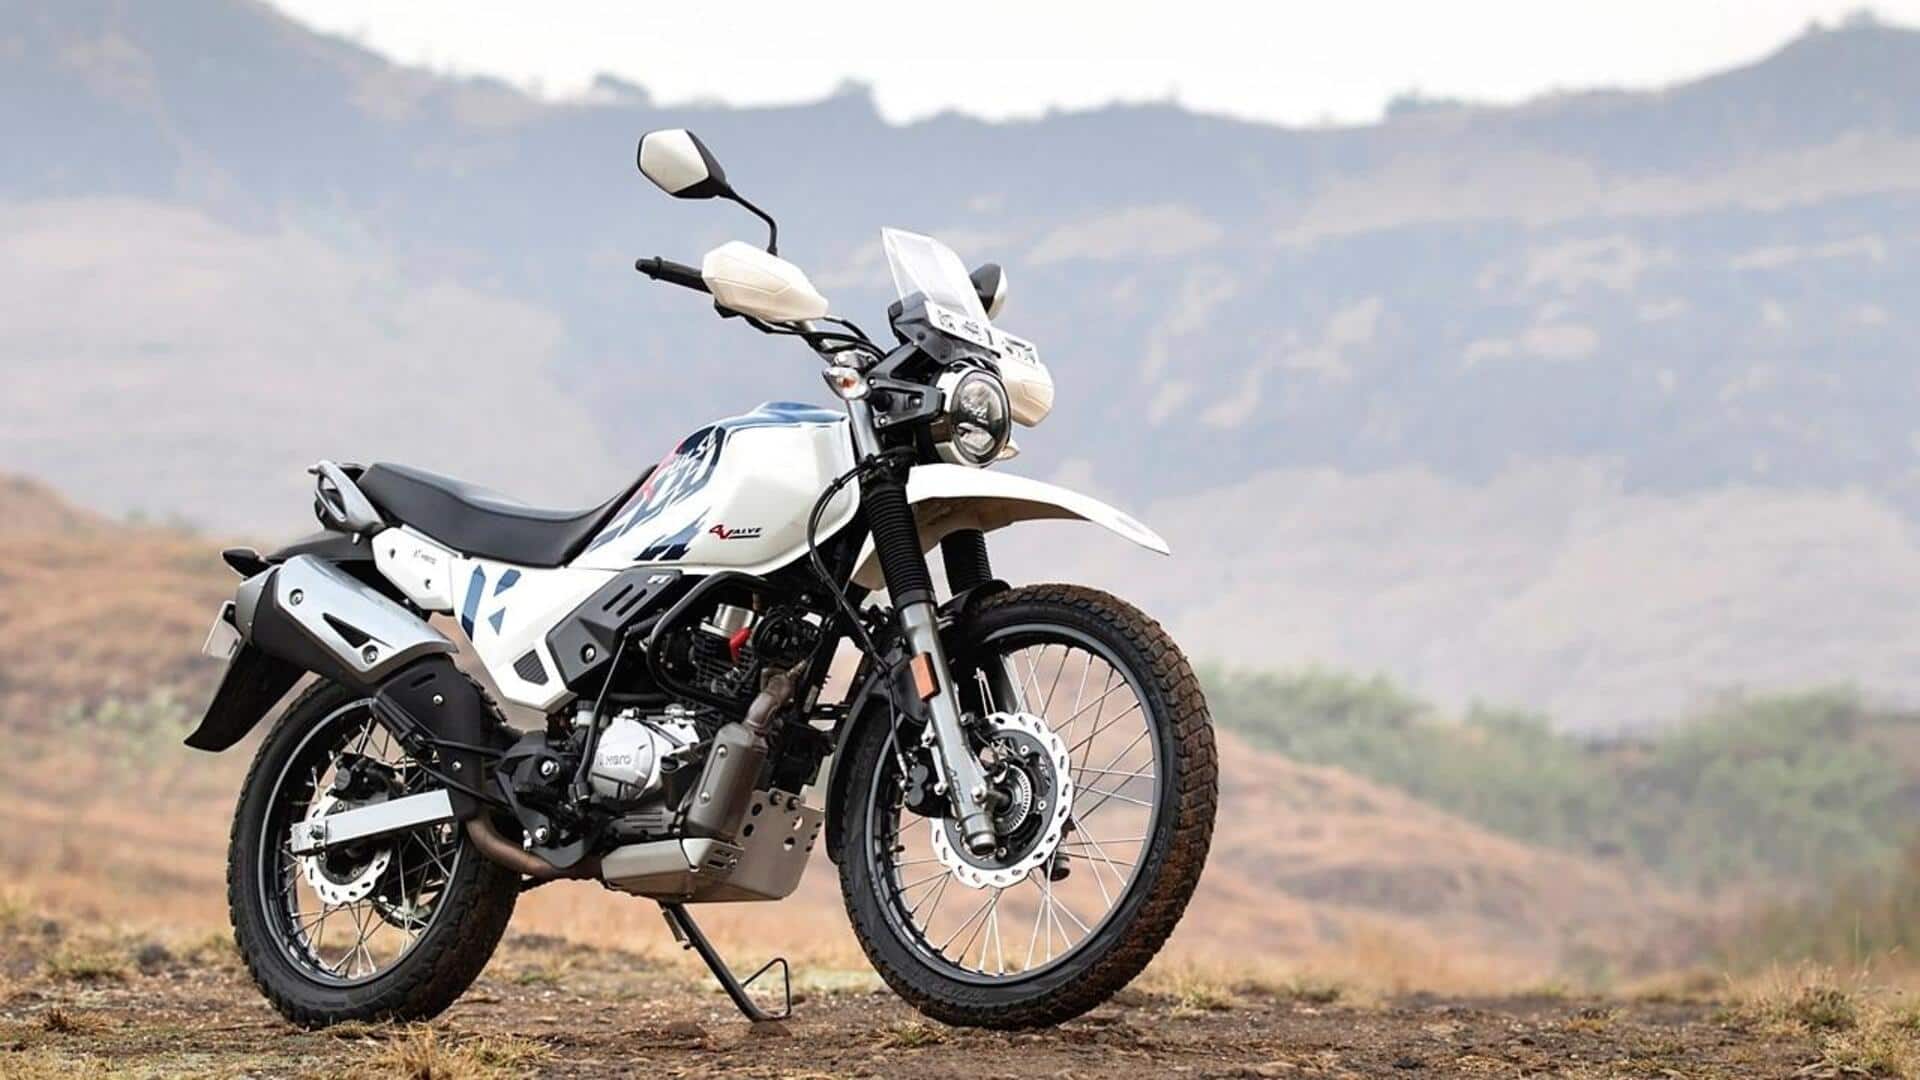 Hero XPulse spied testing in 440cc guise: What to expect